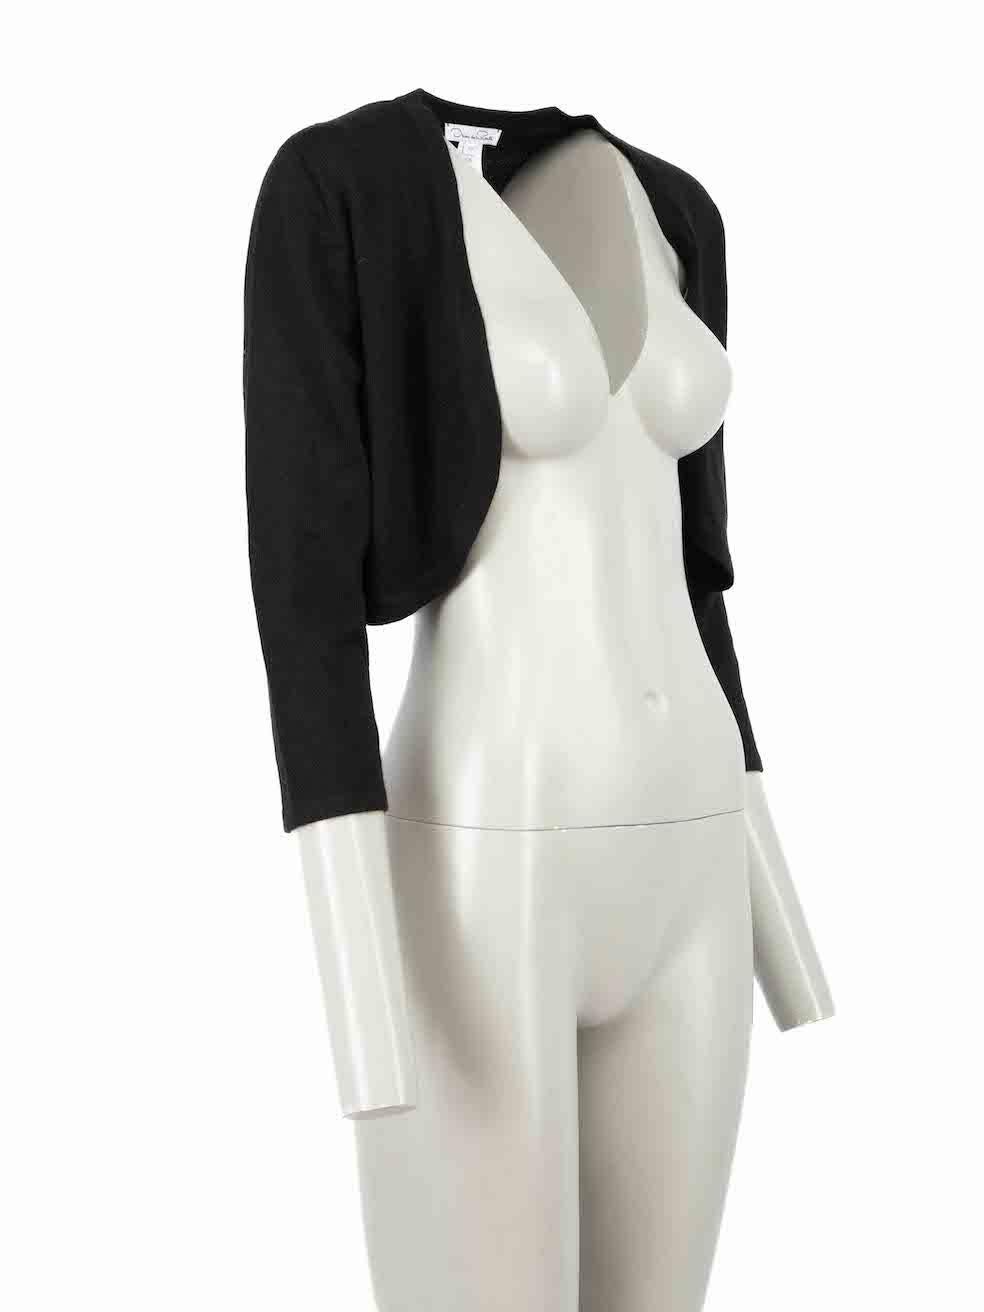 CONDITION is Very good. Minimal wear to knitwear is evident. Minimal wear to knit composition with a single small pull to the weave found at the front on this used Oscar de la Renta designer resale item.
 
Details
Black
Cashmere
Knit cardigan
Long